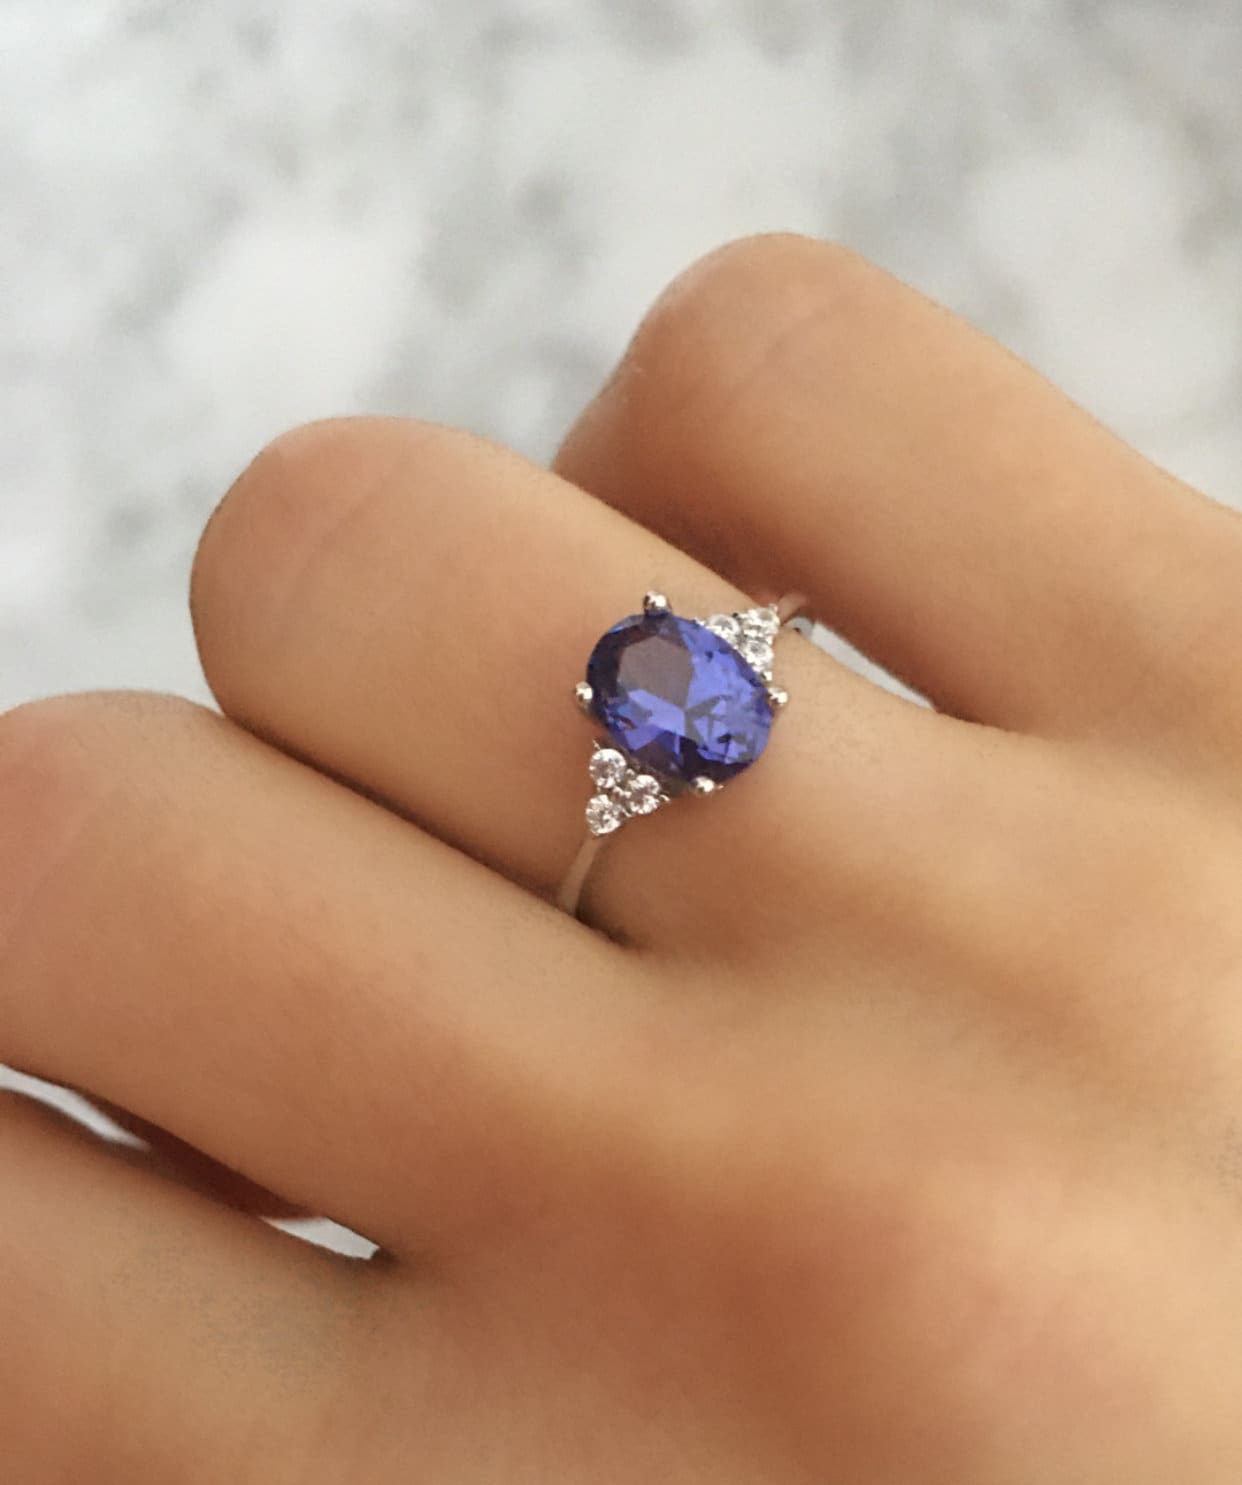 Oval Tanzanite 925 Sterling Silver Ring Jewelry